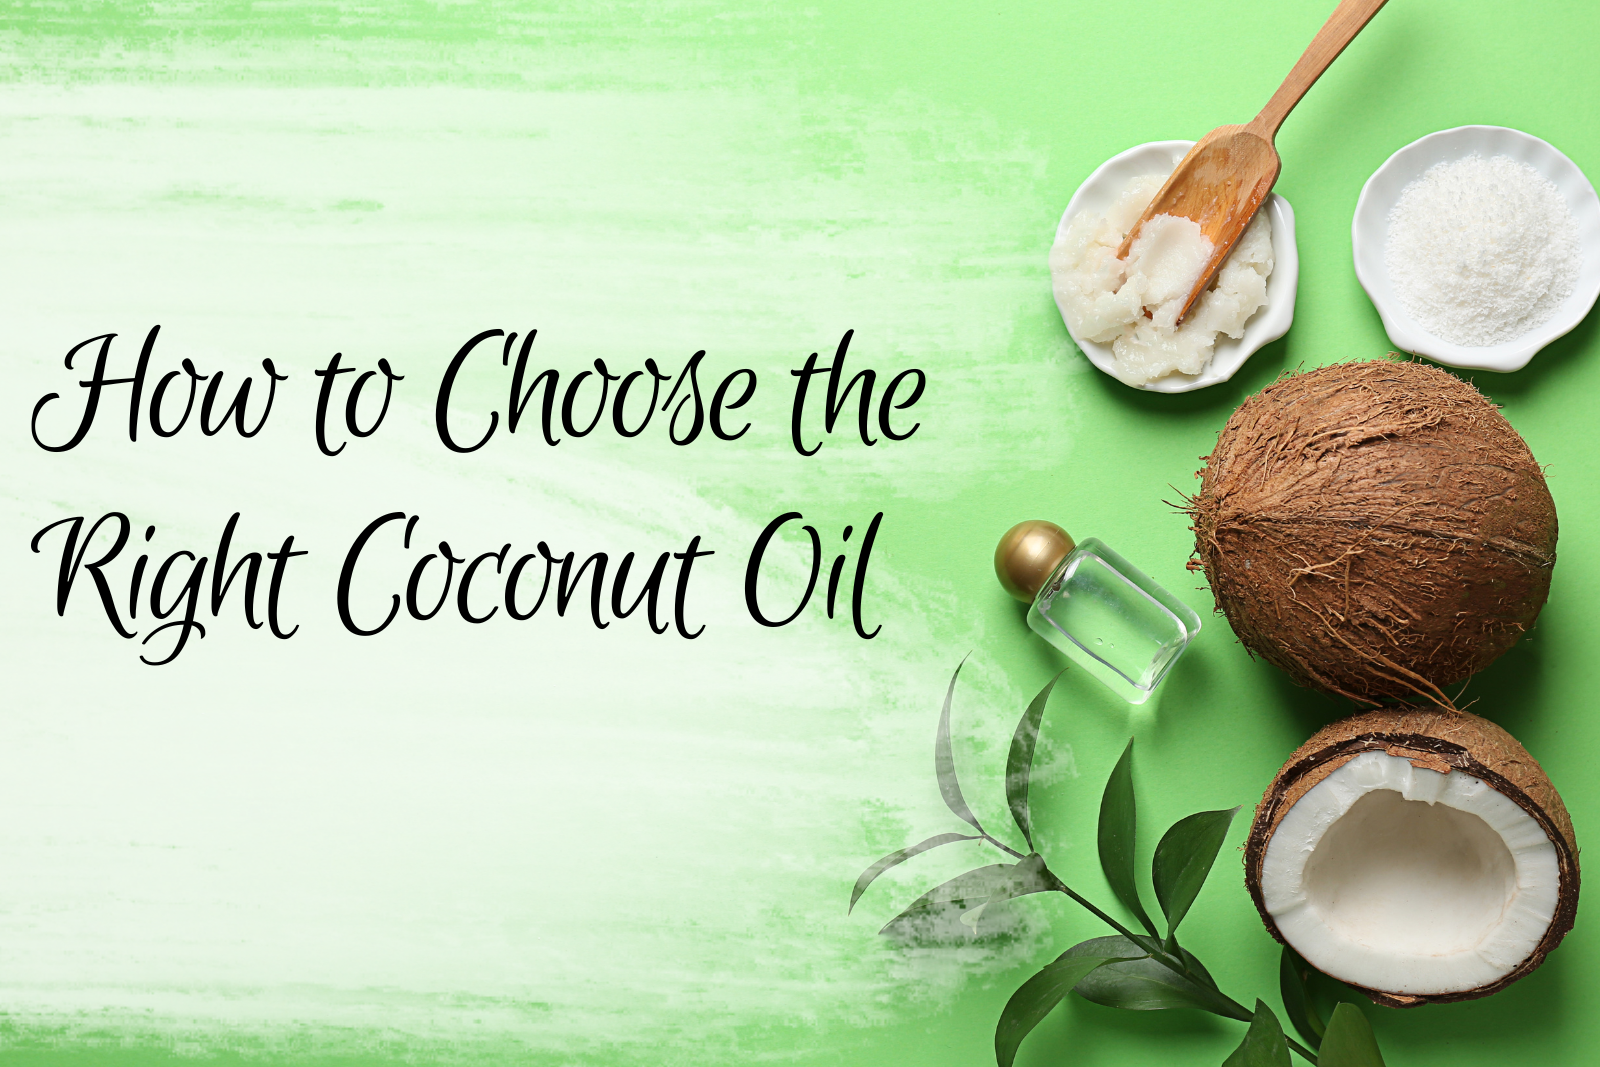 How to Choose the Right Coconut Oil